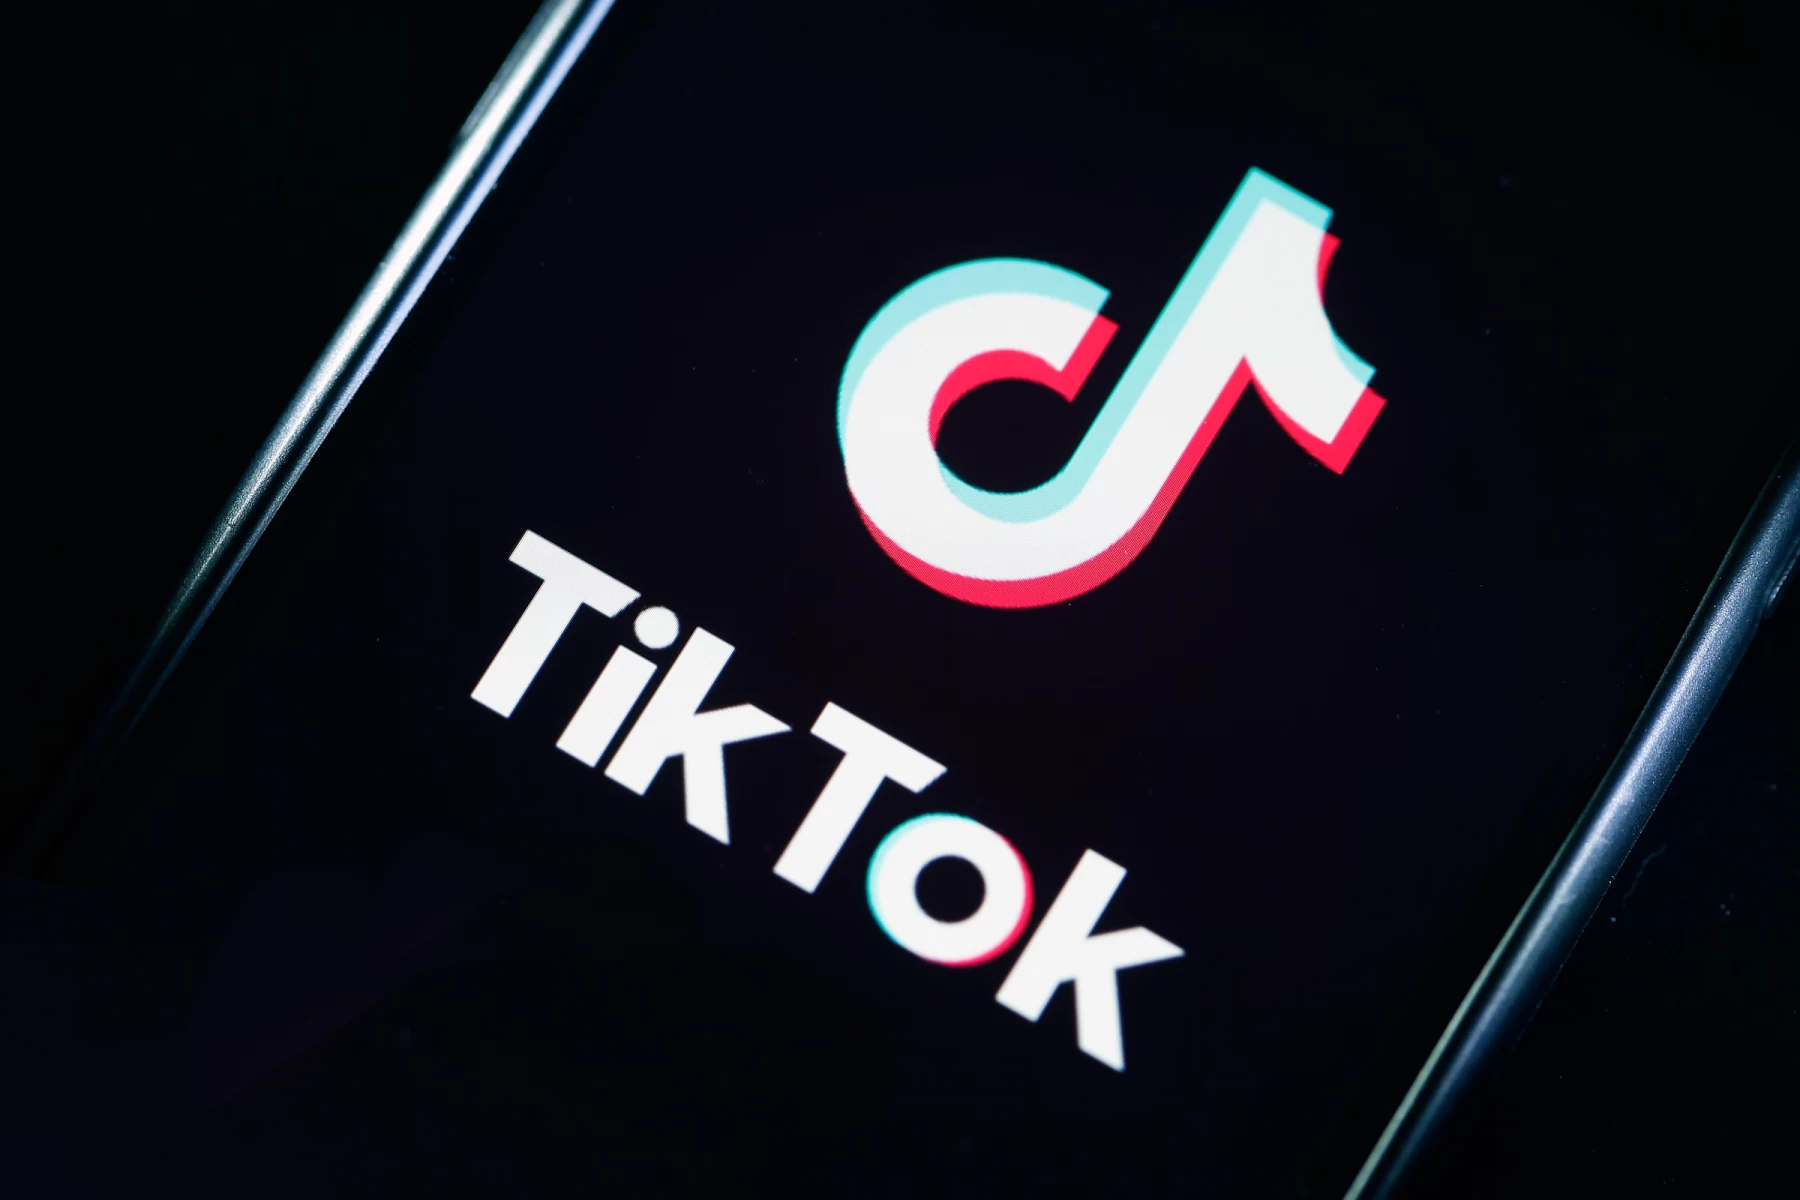 PHC allows government to unblock video sharing app TikTok